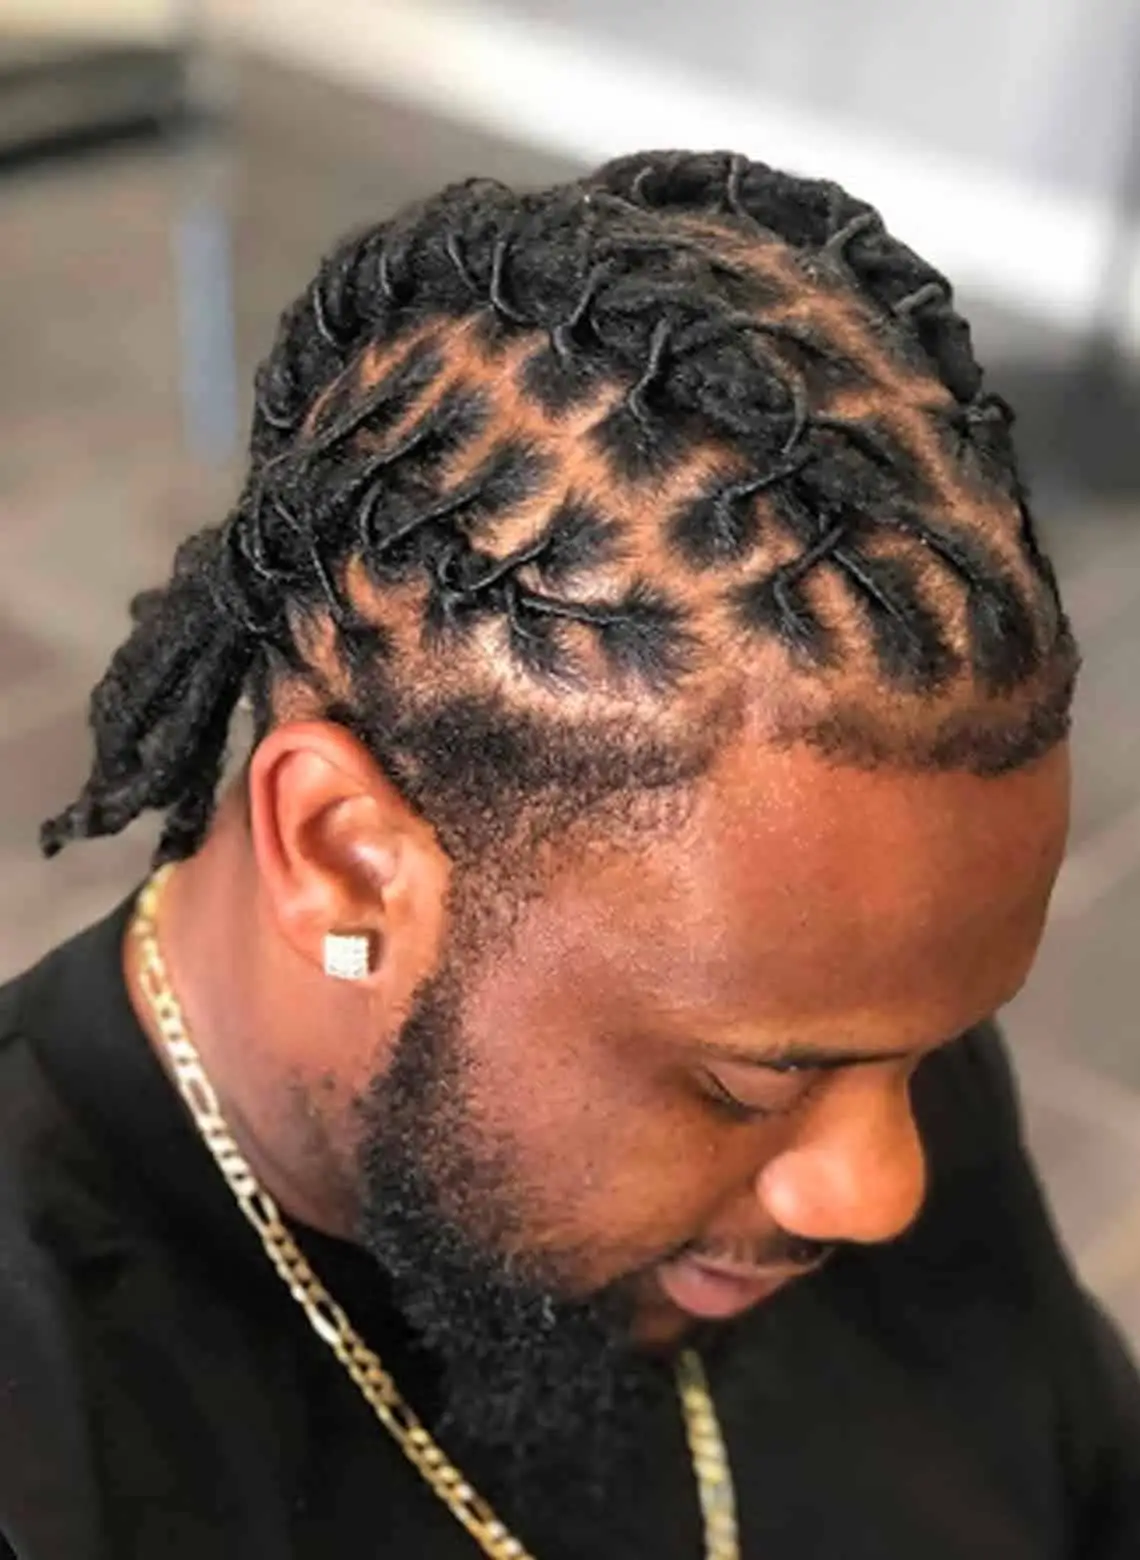 Image of man with basket weave locs. 